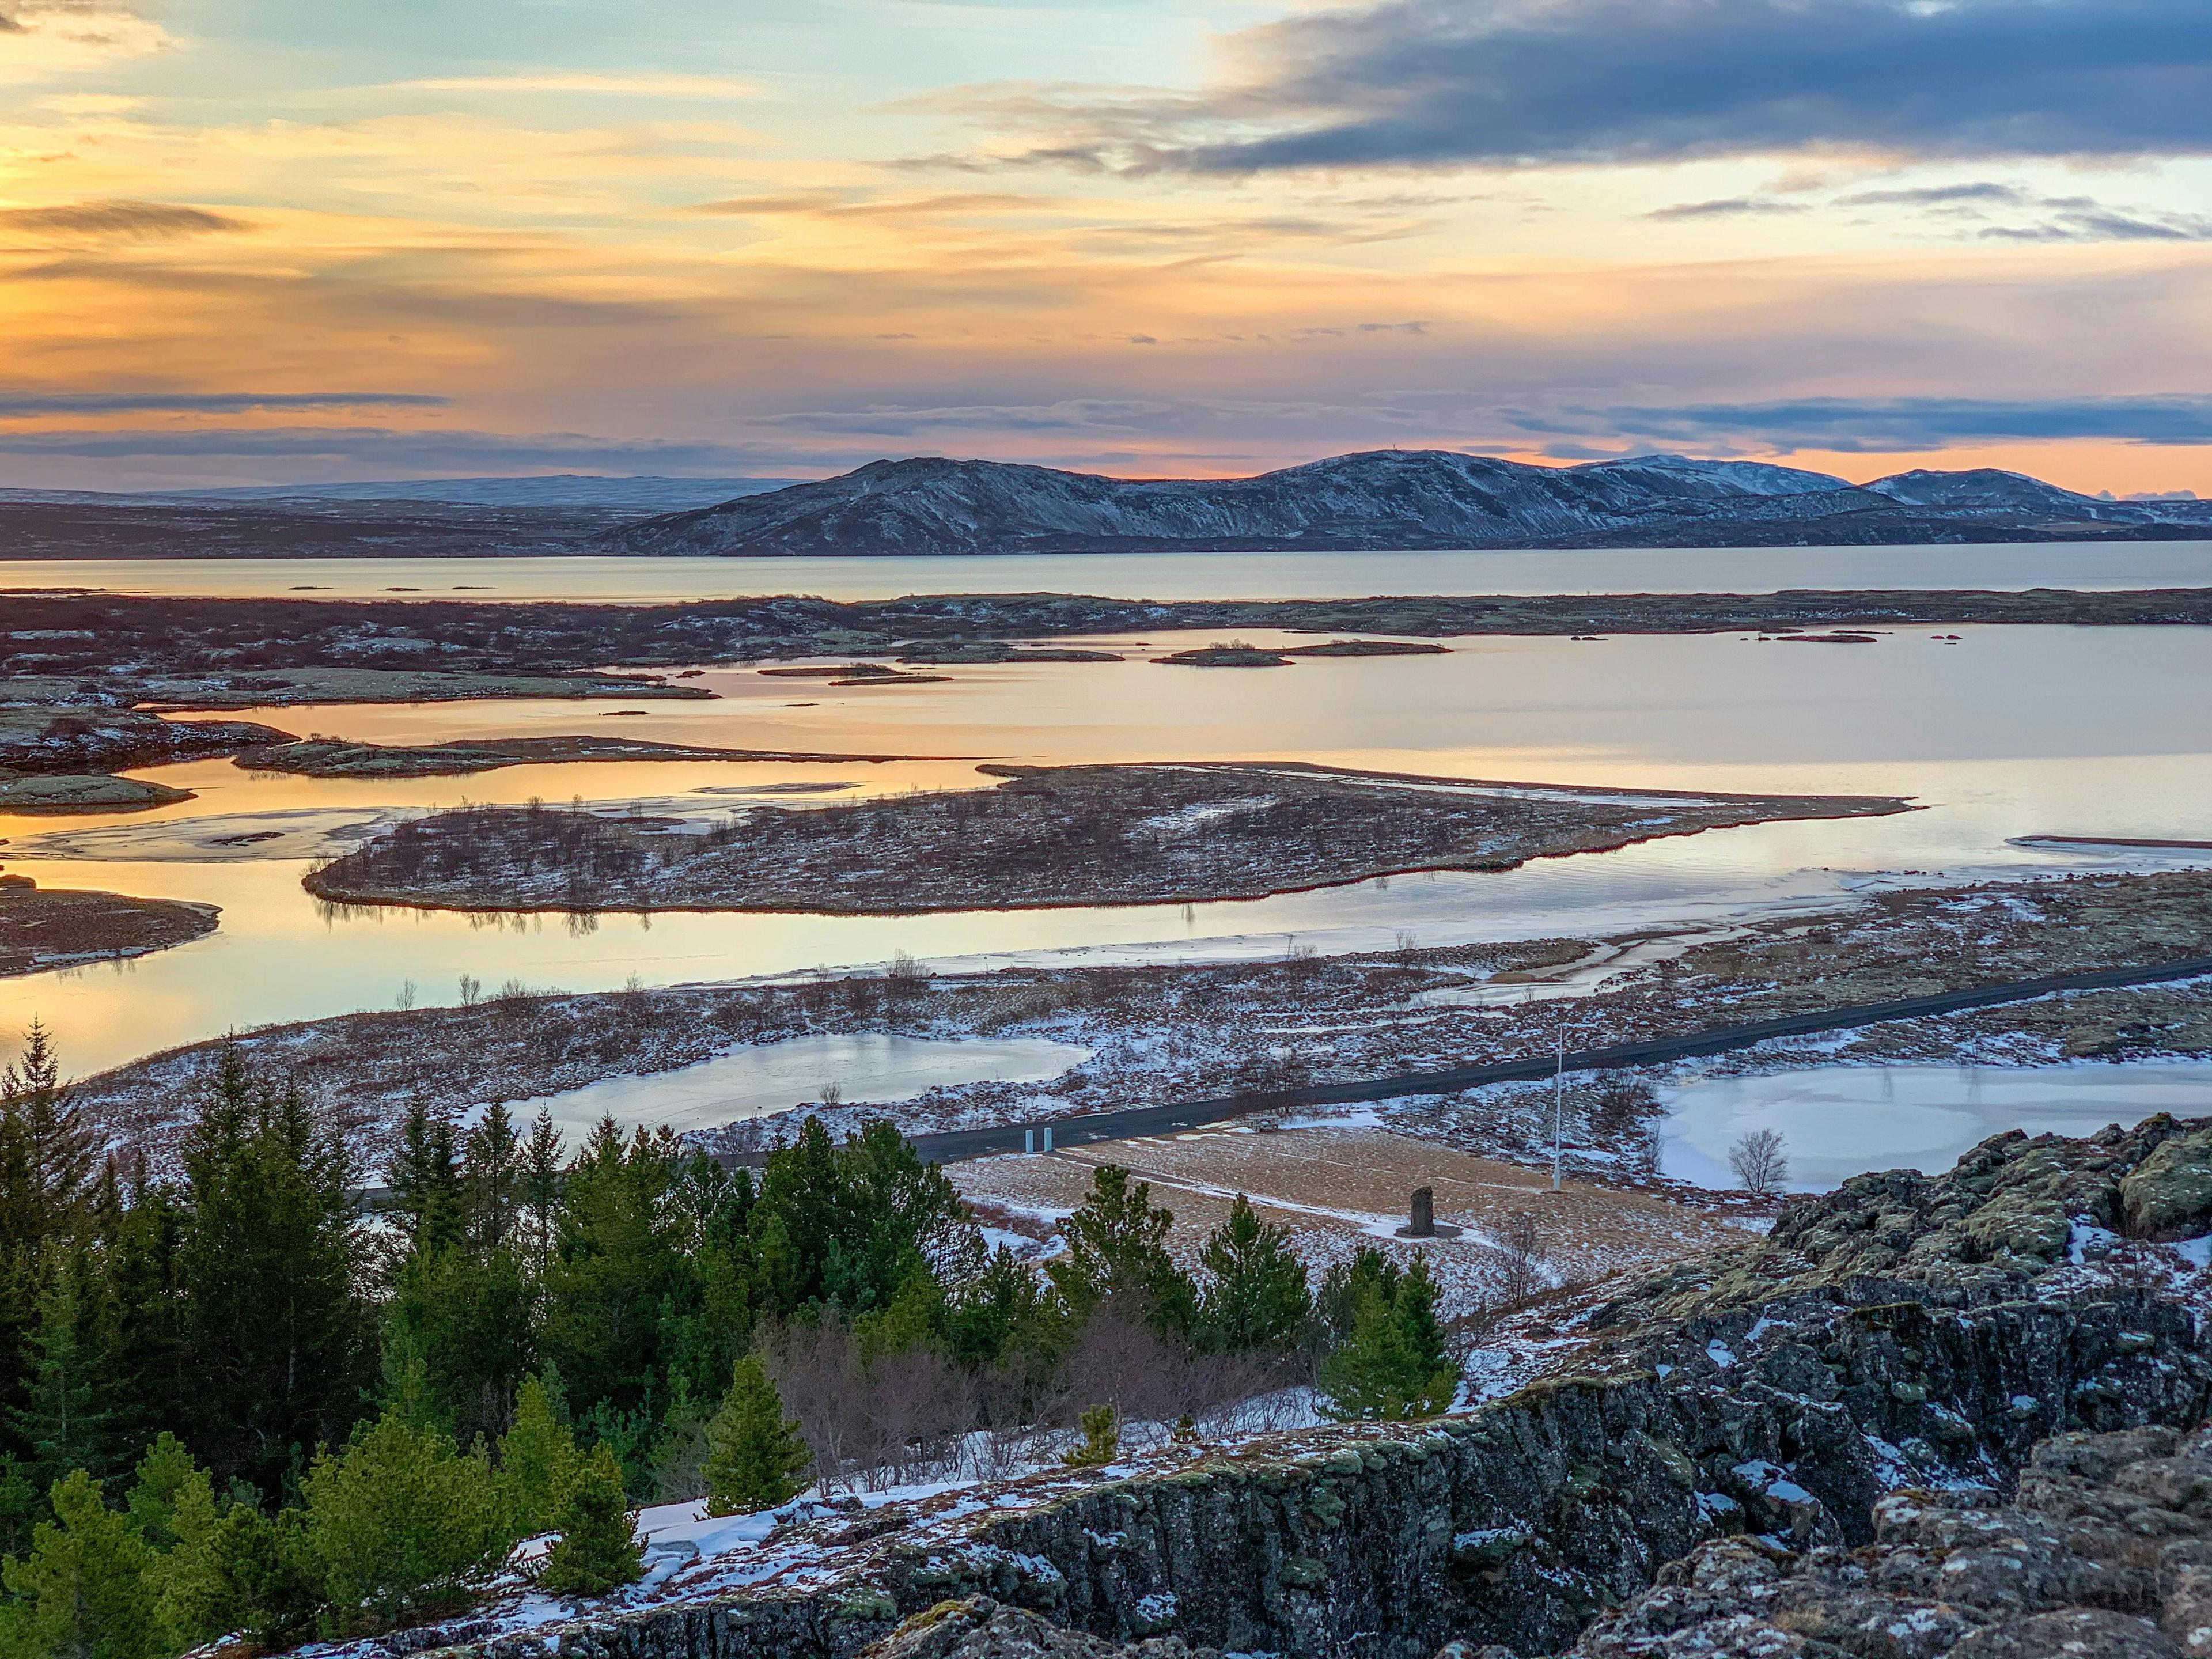 A tranquil sunset view over a vast landscape with reflective waterways, framed by rugged terrain and scattered vegetation, possibly depicting the serene beauty of Þingvellir (Thingvellir) National Park in Iceland.